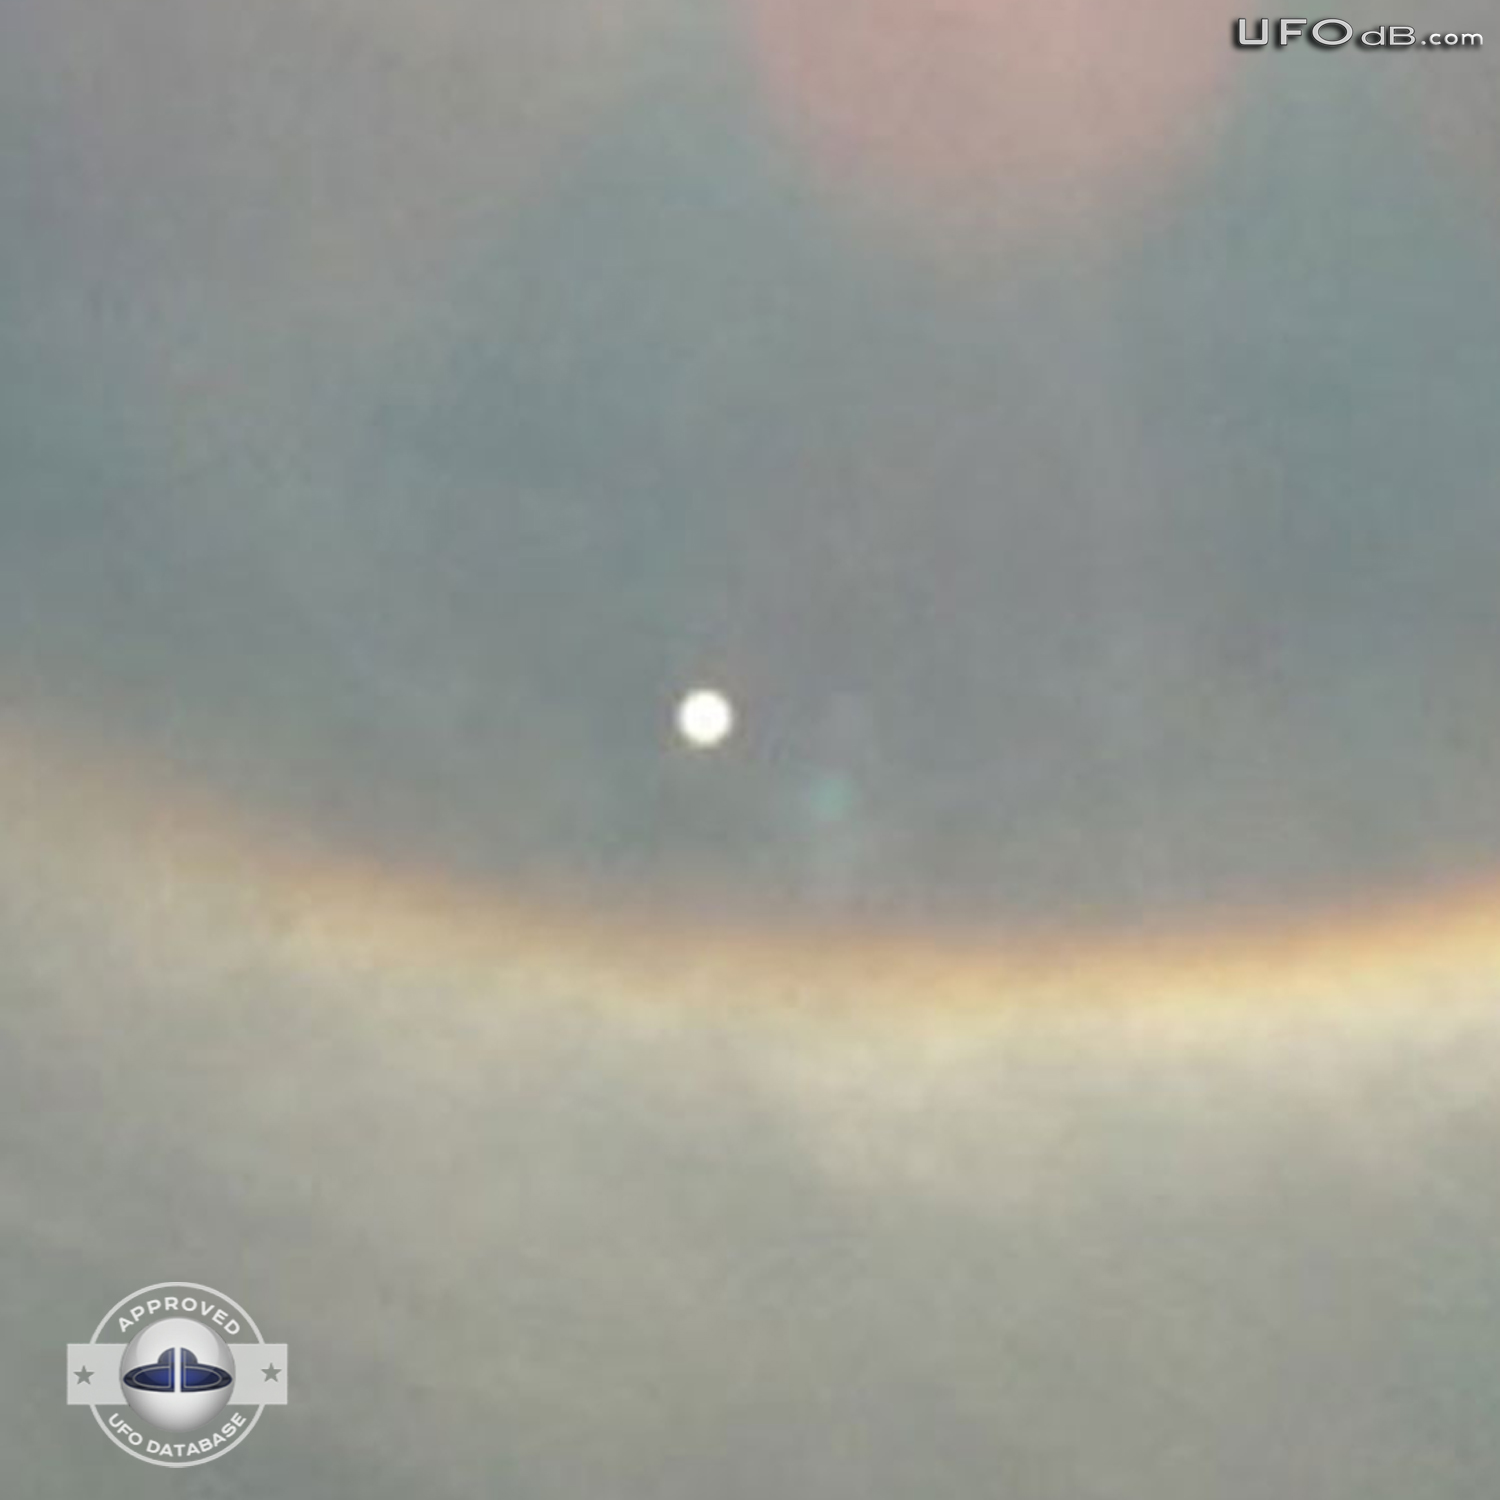 Huge halo around the sun with UFO moving near by in Johannesburg 2010 UFO Picture #348-2